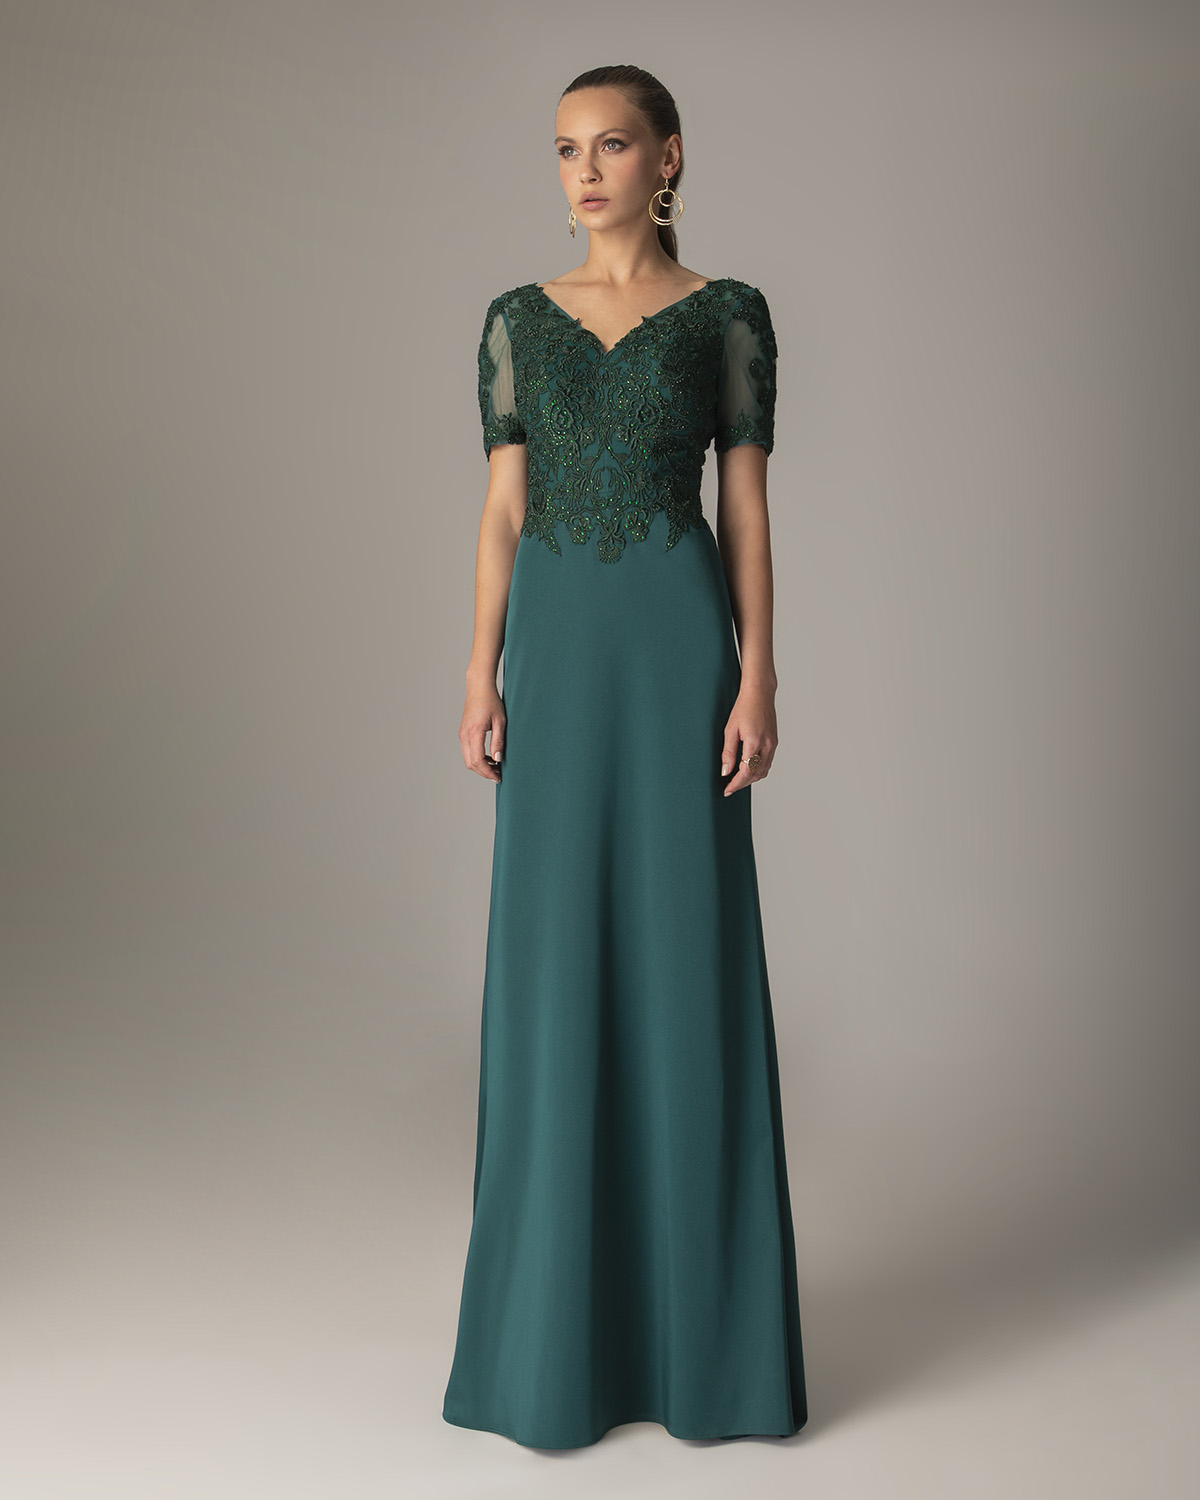 Классические платья / Long satin dress with short sleeves and applique beaded lace on the top